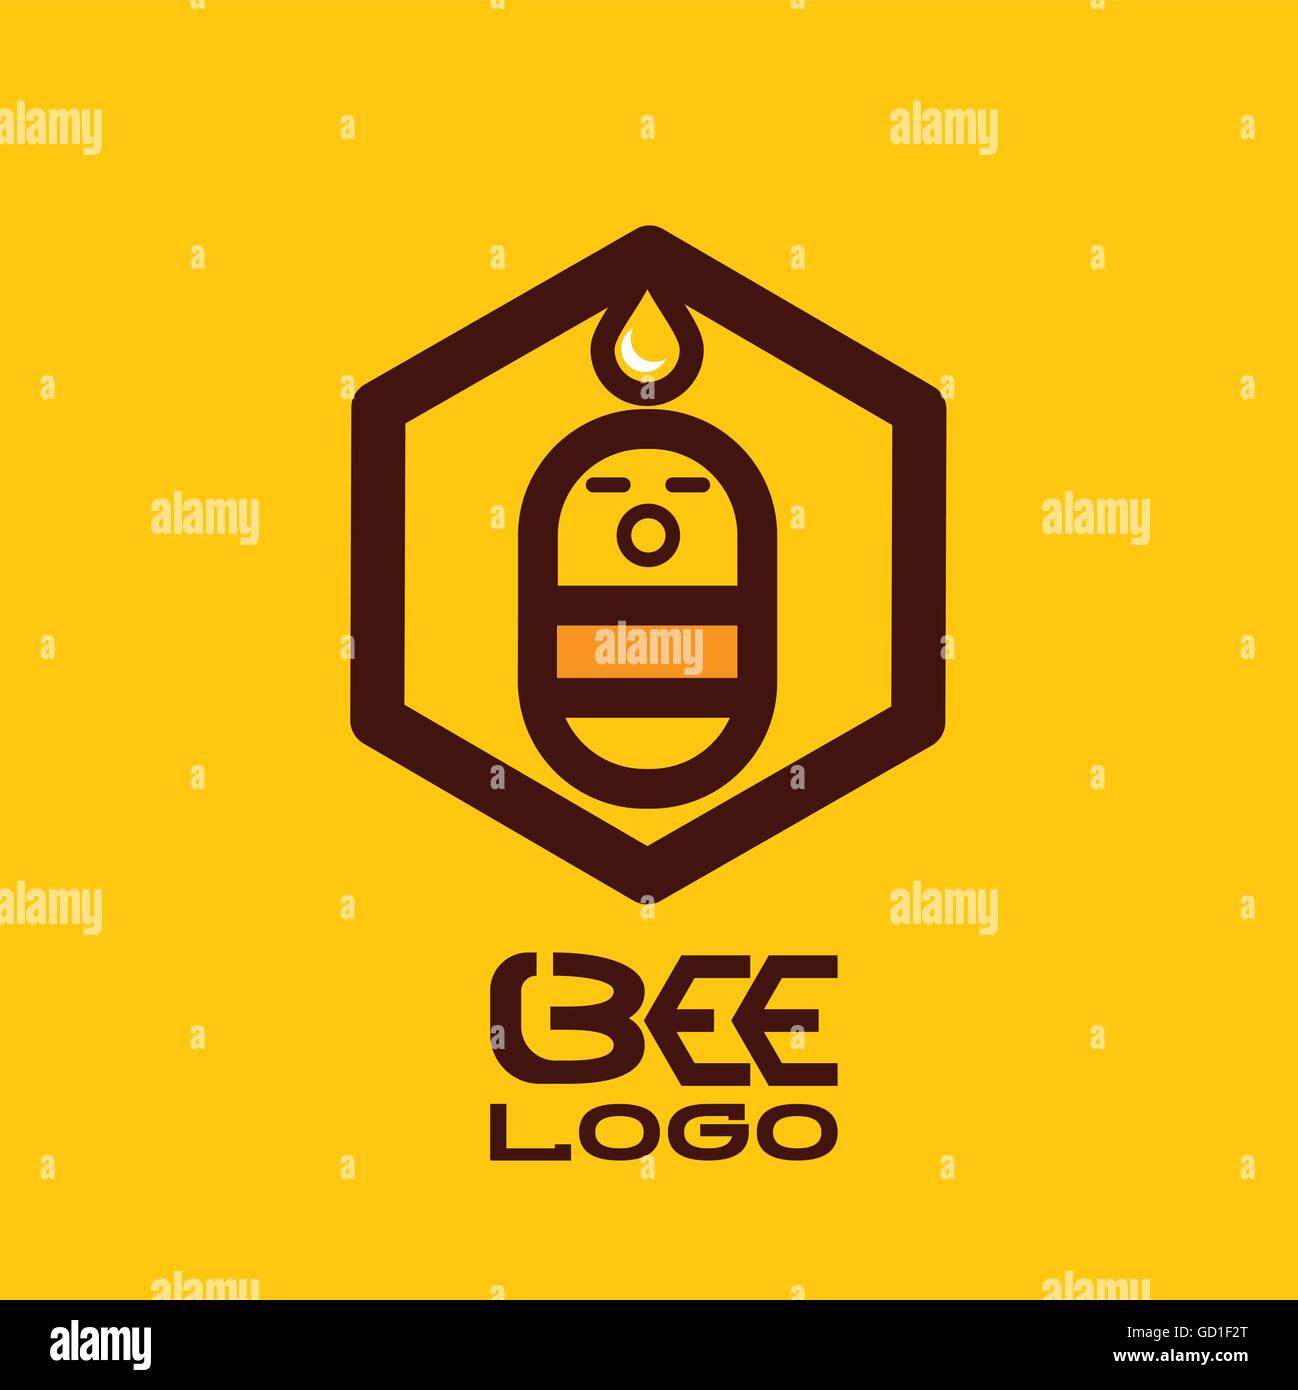 bee logo designed in a simple way so it can be use for multiple proposes like logo ,mark ,symbol or icon. Stock Vector